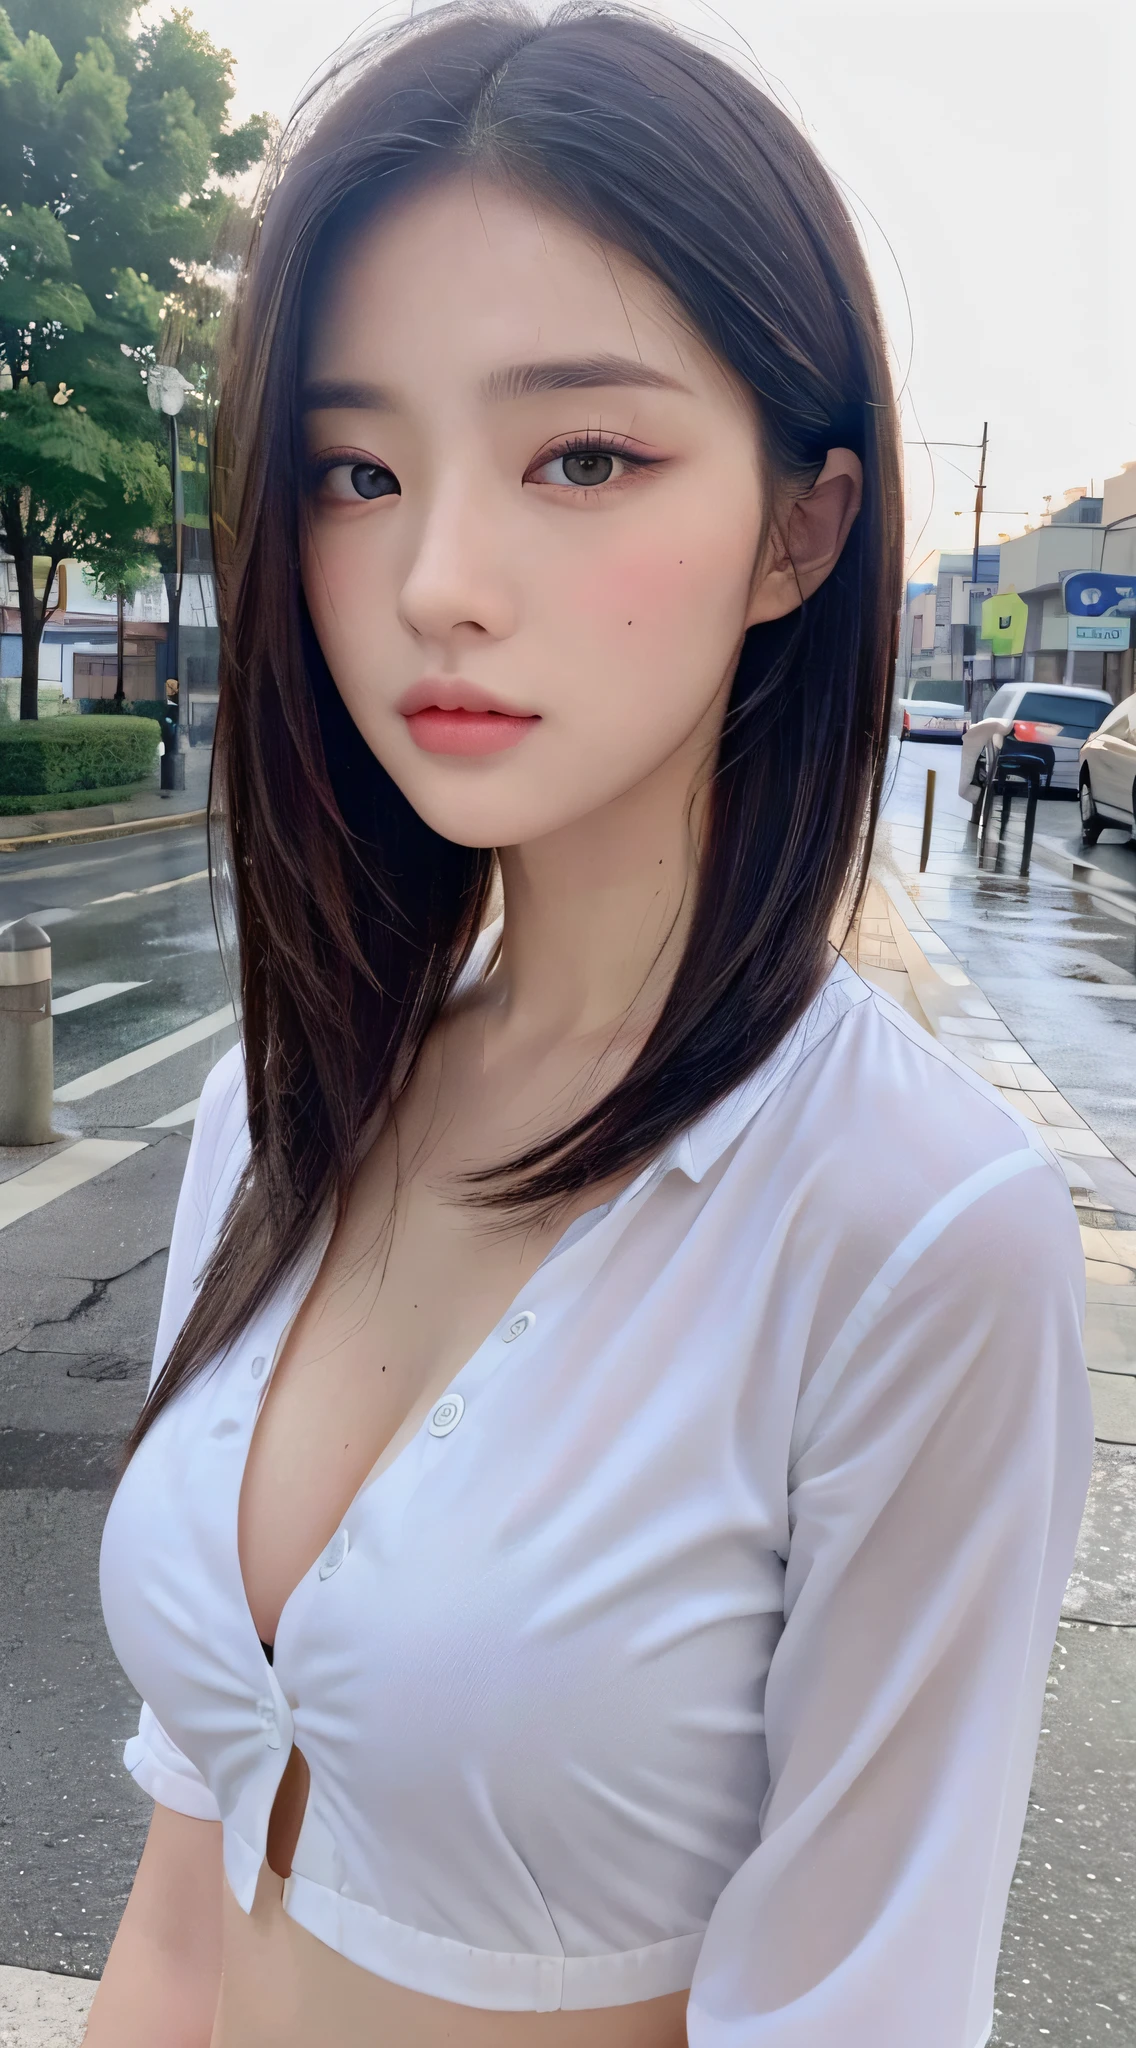 ((Best Quality, 8K, Masterpiece: 1.3)), Sharp: 1.2, Perfect Body Beauty: 1.4, Slim Abs: 1.2, ((Layered Hairstyle, Big Breasts: 1.2)), (Wet White Button Long Shirt: 1.1), (Rain, Street: 1.2), Wet: 1.5, Highly Detailed Face and Skin Texture, Detailed Eyes, Double Eyelids, Looking at the Camera